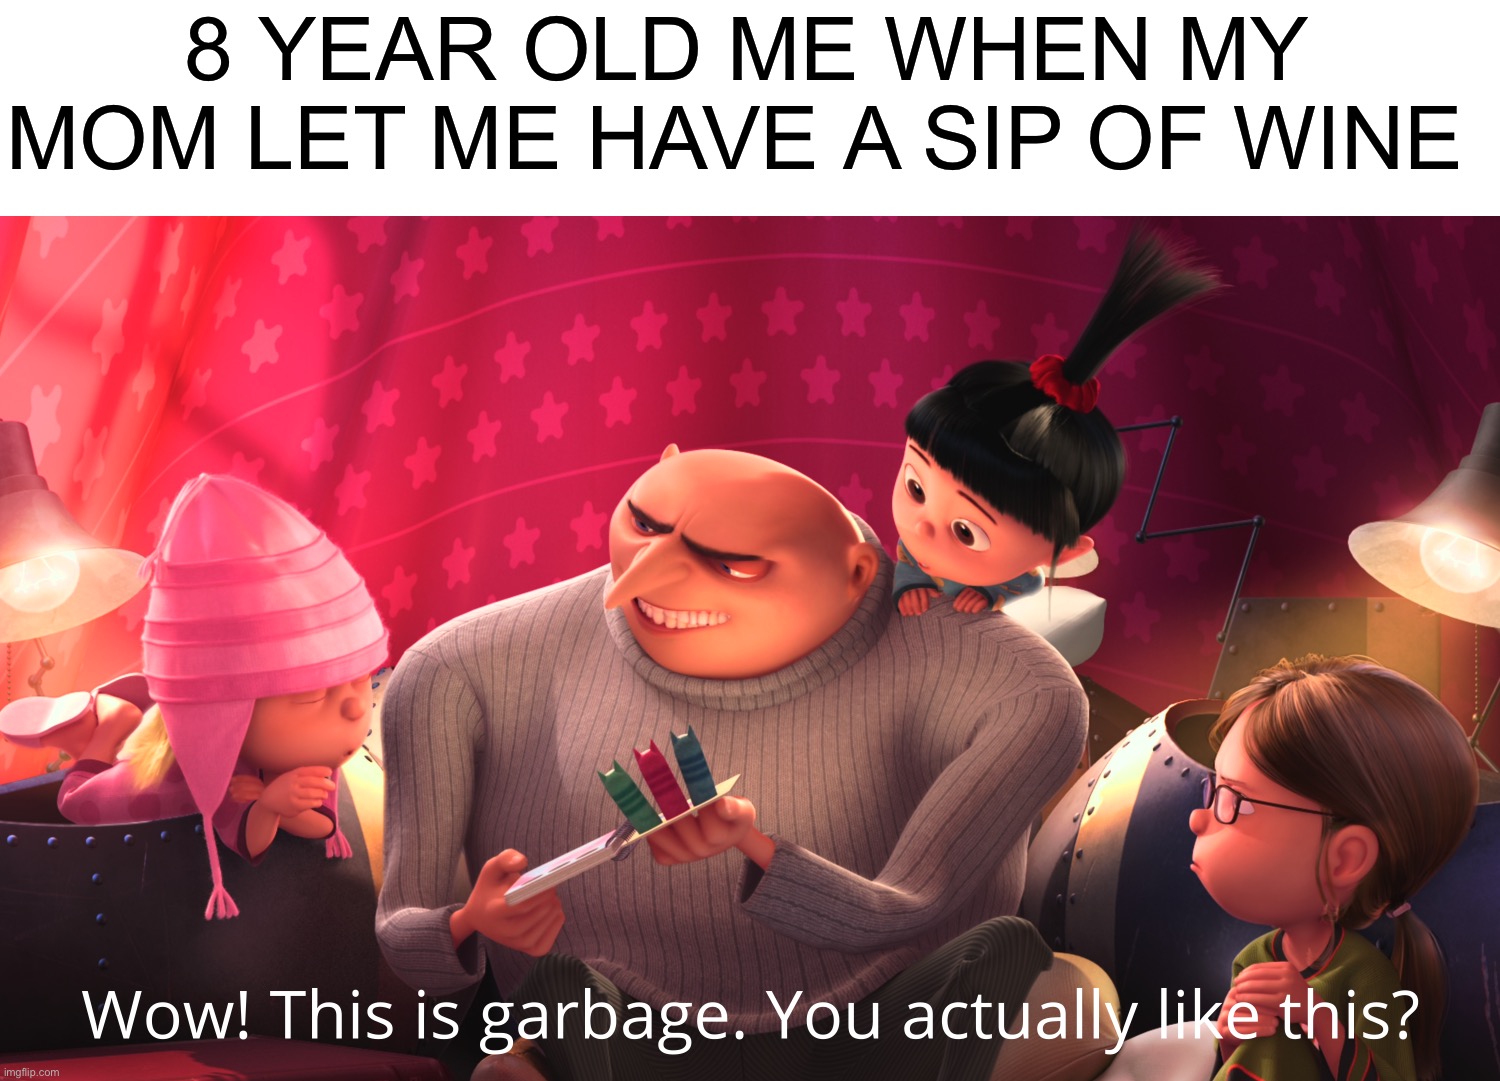 Alcohol is disgusting | 8 YEAR OLD ME WHEN MY MOM LET ME HAVE A SIP OF WINE | image tagged in wow this is garbage you actually like this,memes,funny,alcohol,wine,eww | made w/ Imgflip meme maker